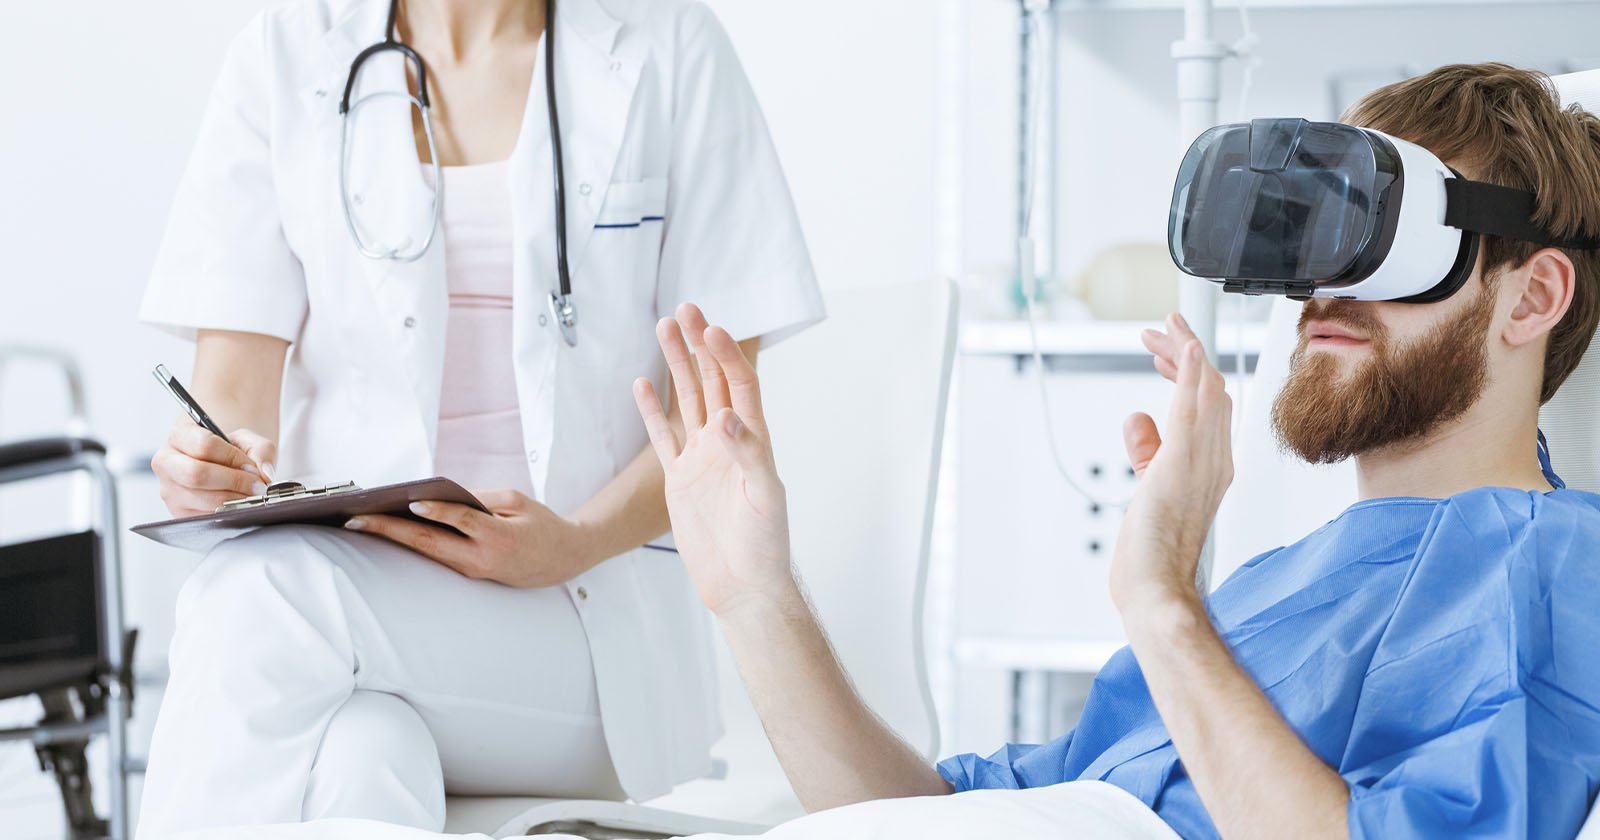 Study Finds Patients Wearing VR Headsets Need Less Anaesthetic